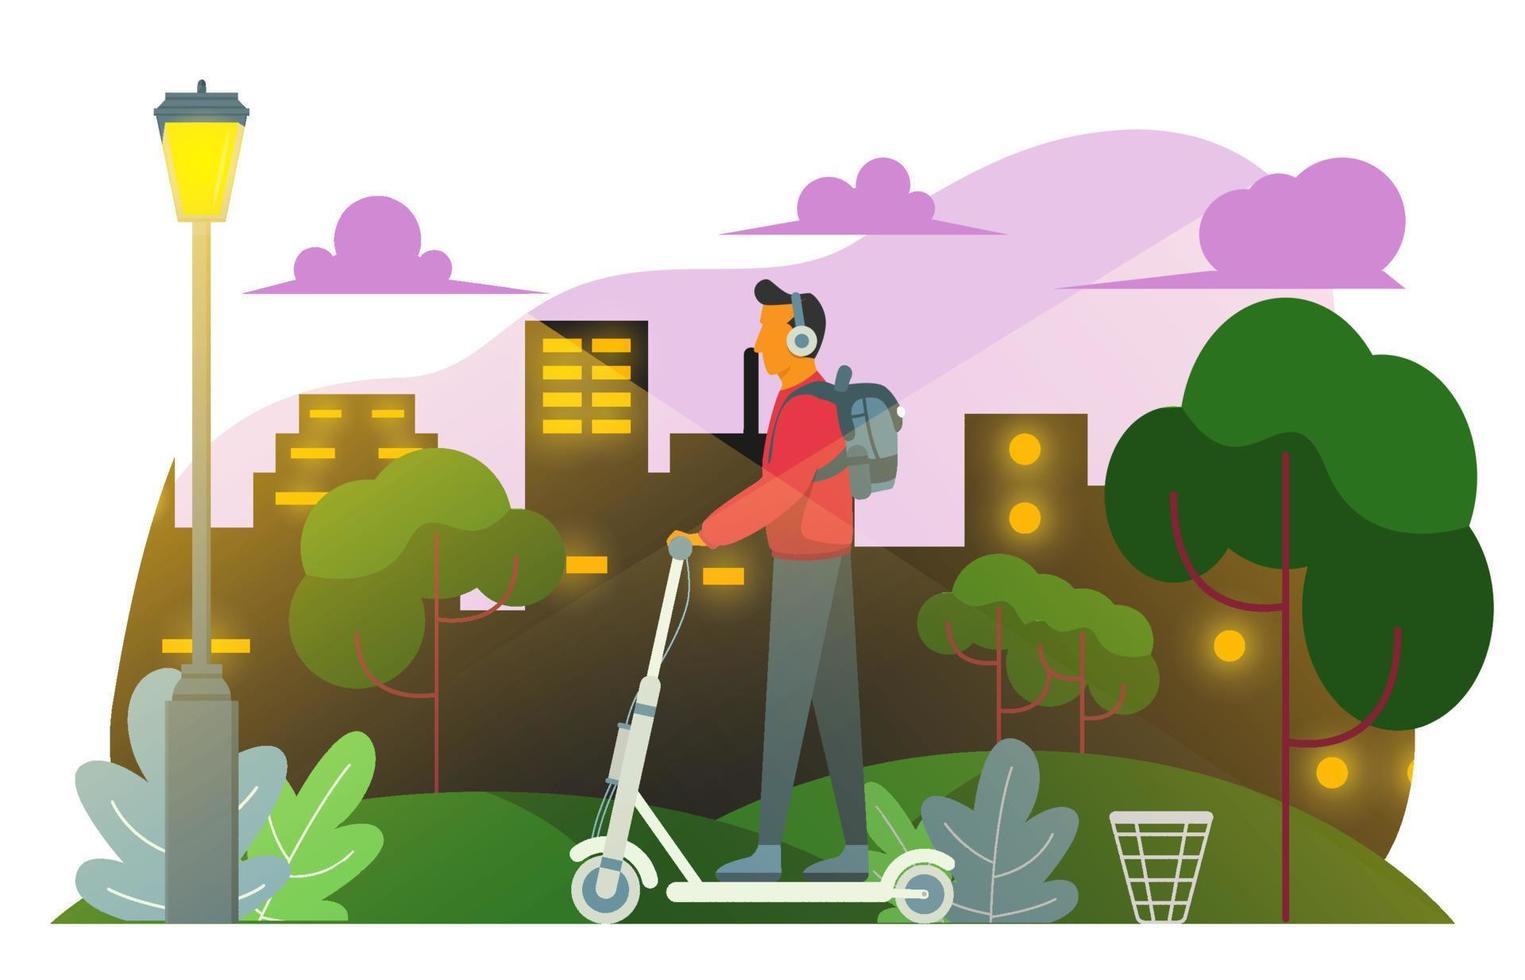 Man with Headphones Riding A Scooter at Night in A City Park Illustration Design vector